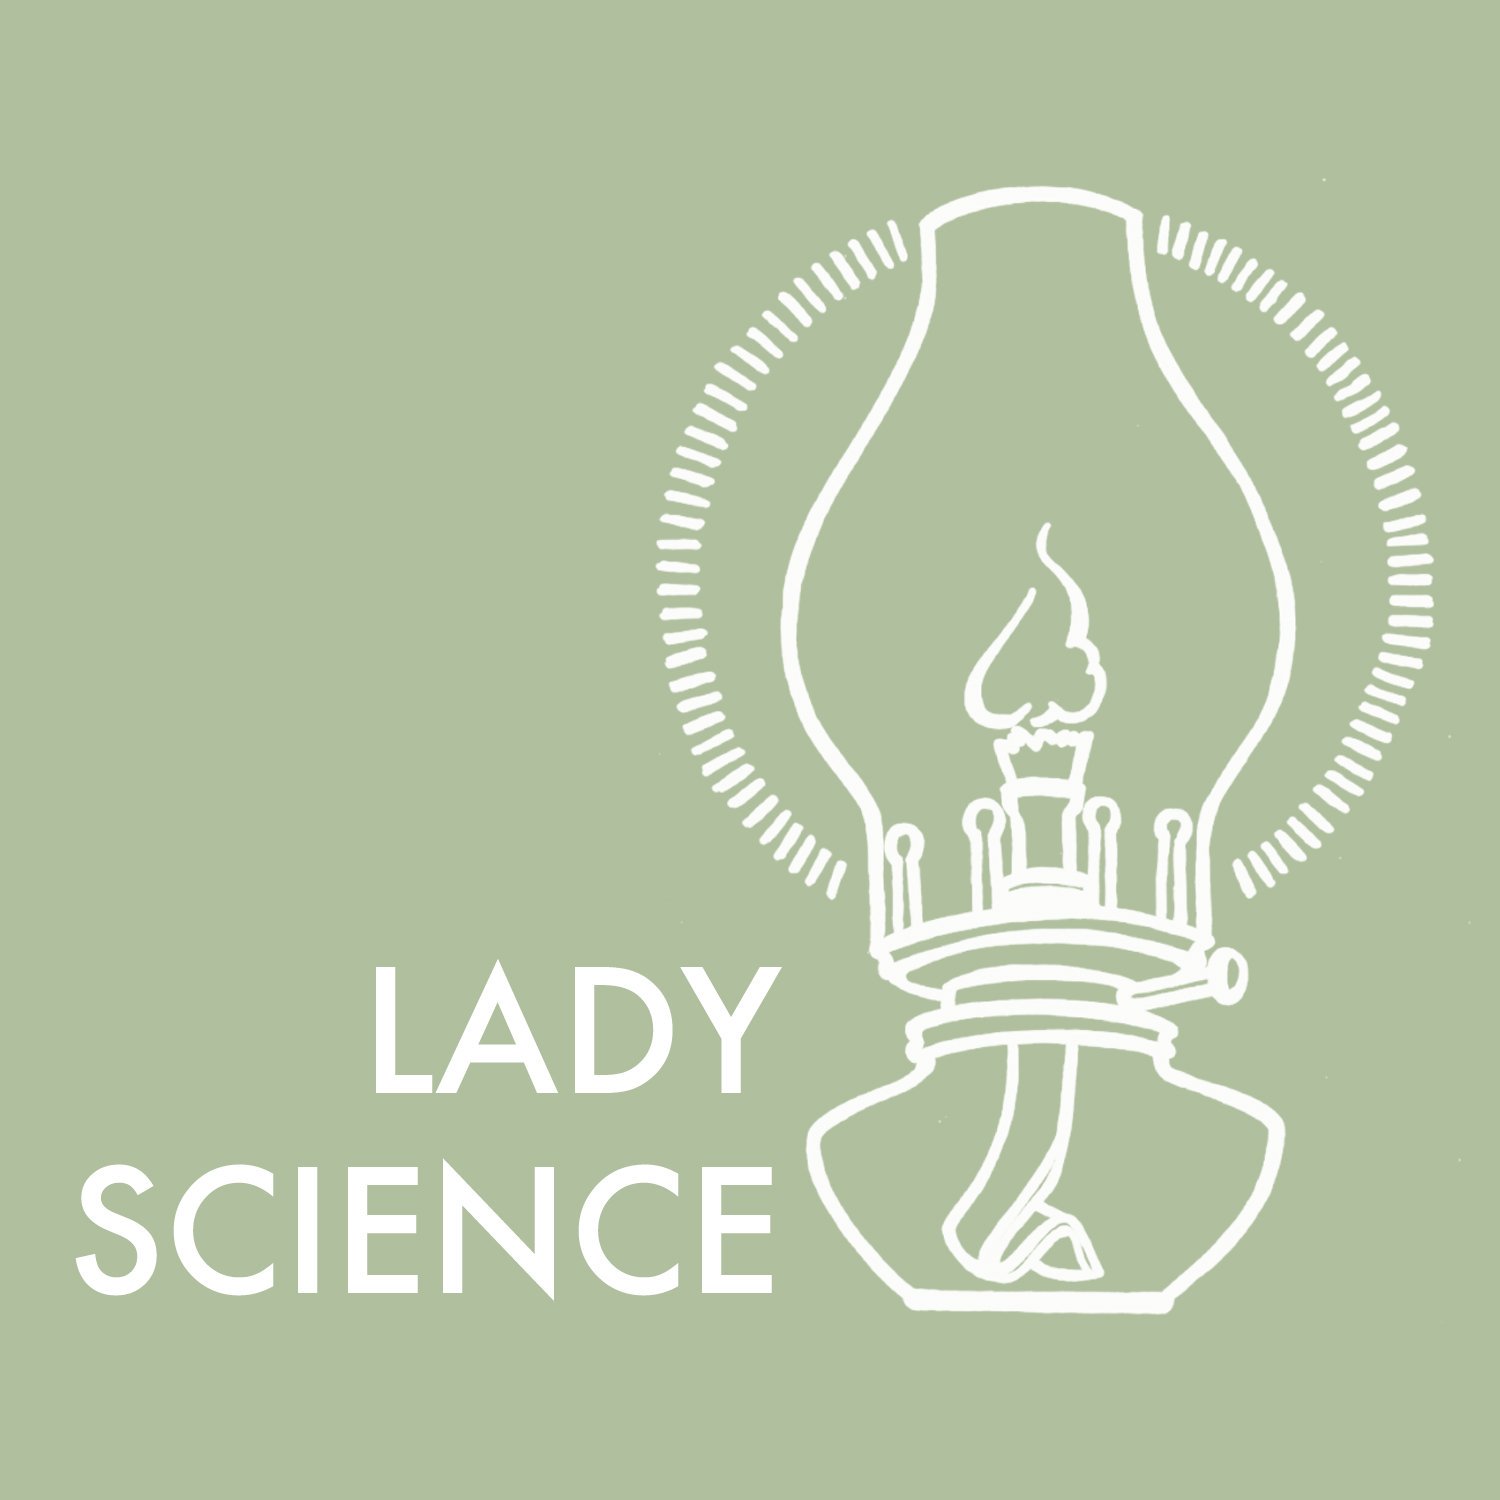 It's #AdaLovelaceDay all year around here! Browse our archive of excellent feminist science and history writing
https://t.co/k8bEGjbOQv https://t.co/g1MuFz57PJ